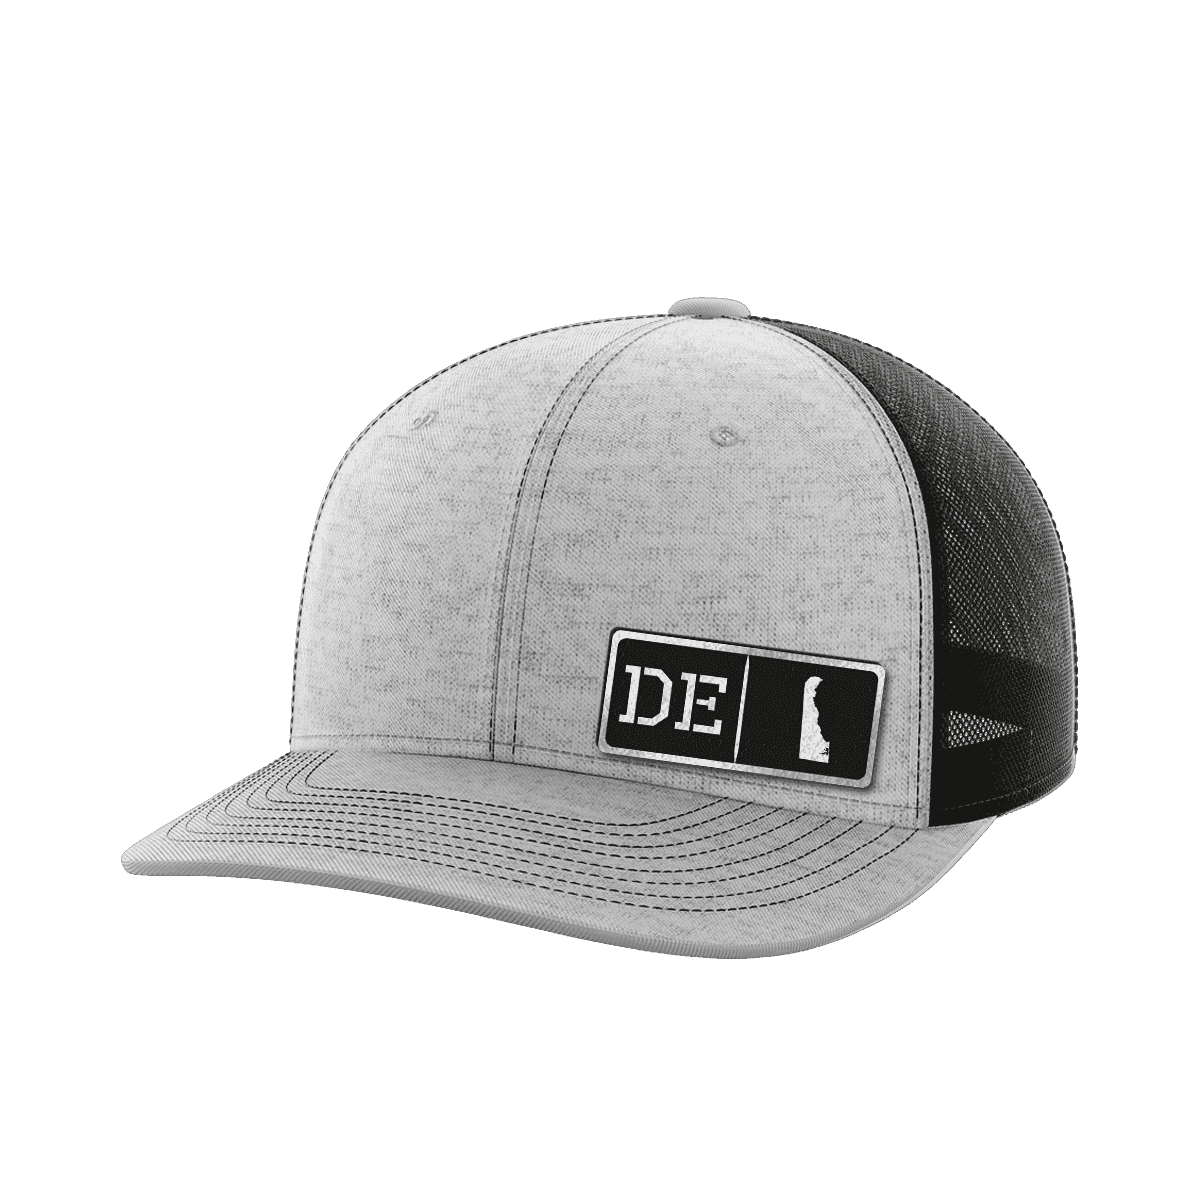 Thumbnail for Delaware Homegrown Hats - Greater Half